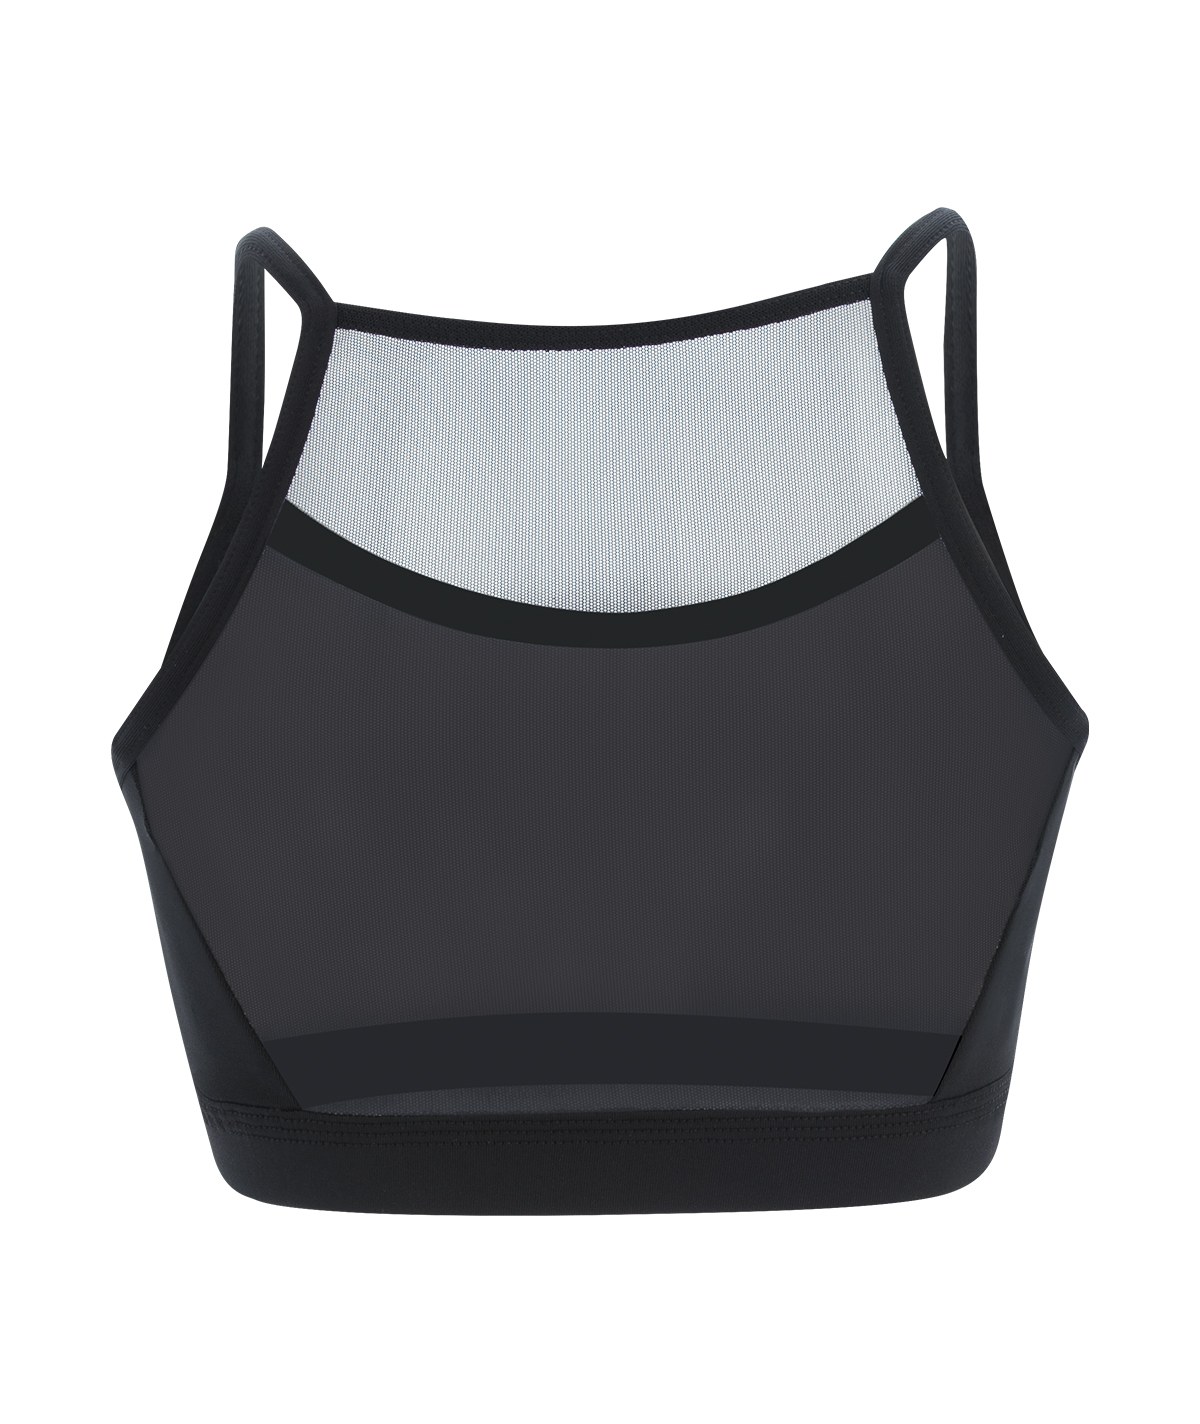 GK All Star Black Cheer Crop Top with Mesh Inset Back